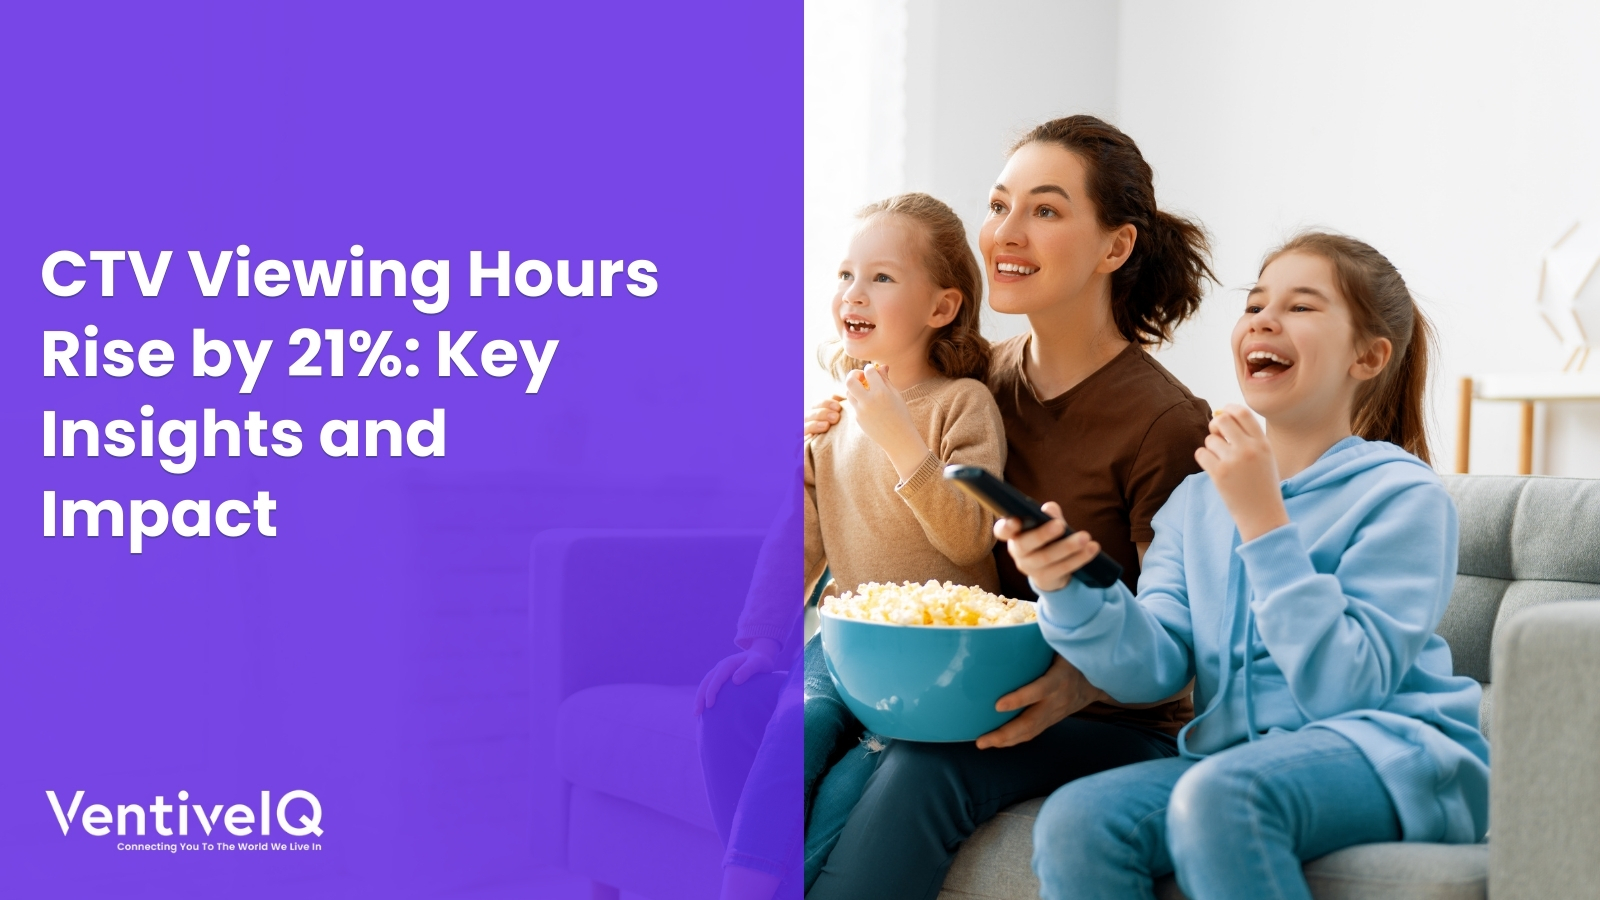 CTV Viewing Hours Rise by 21%: Key Insights and Impact